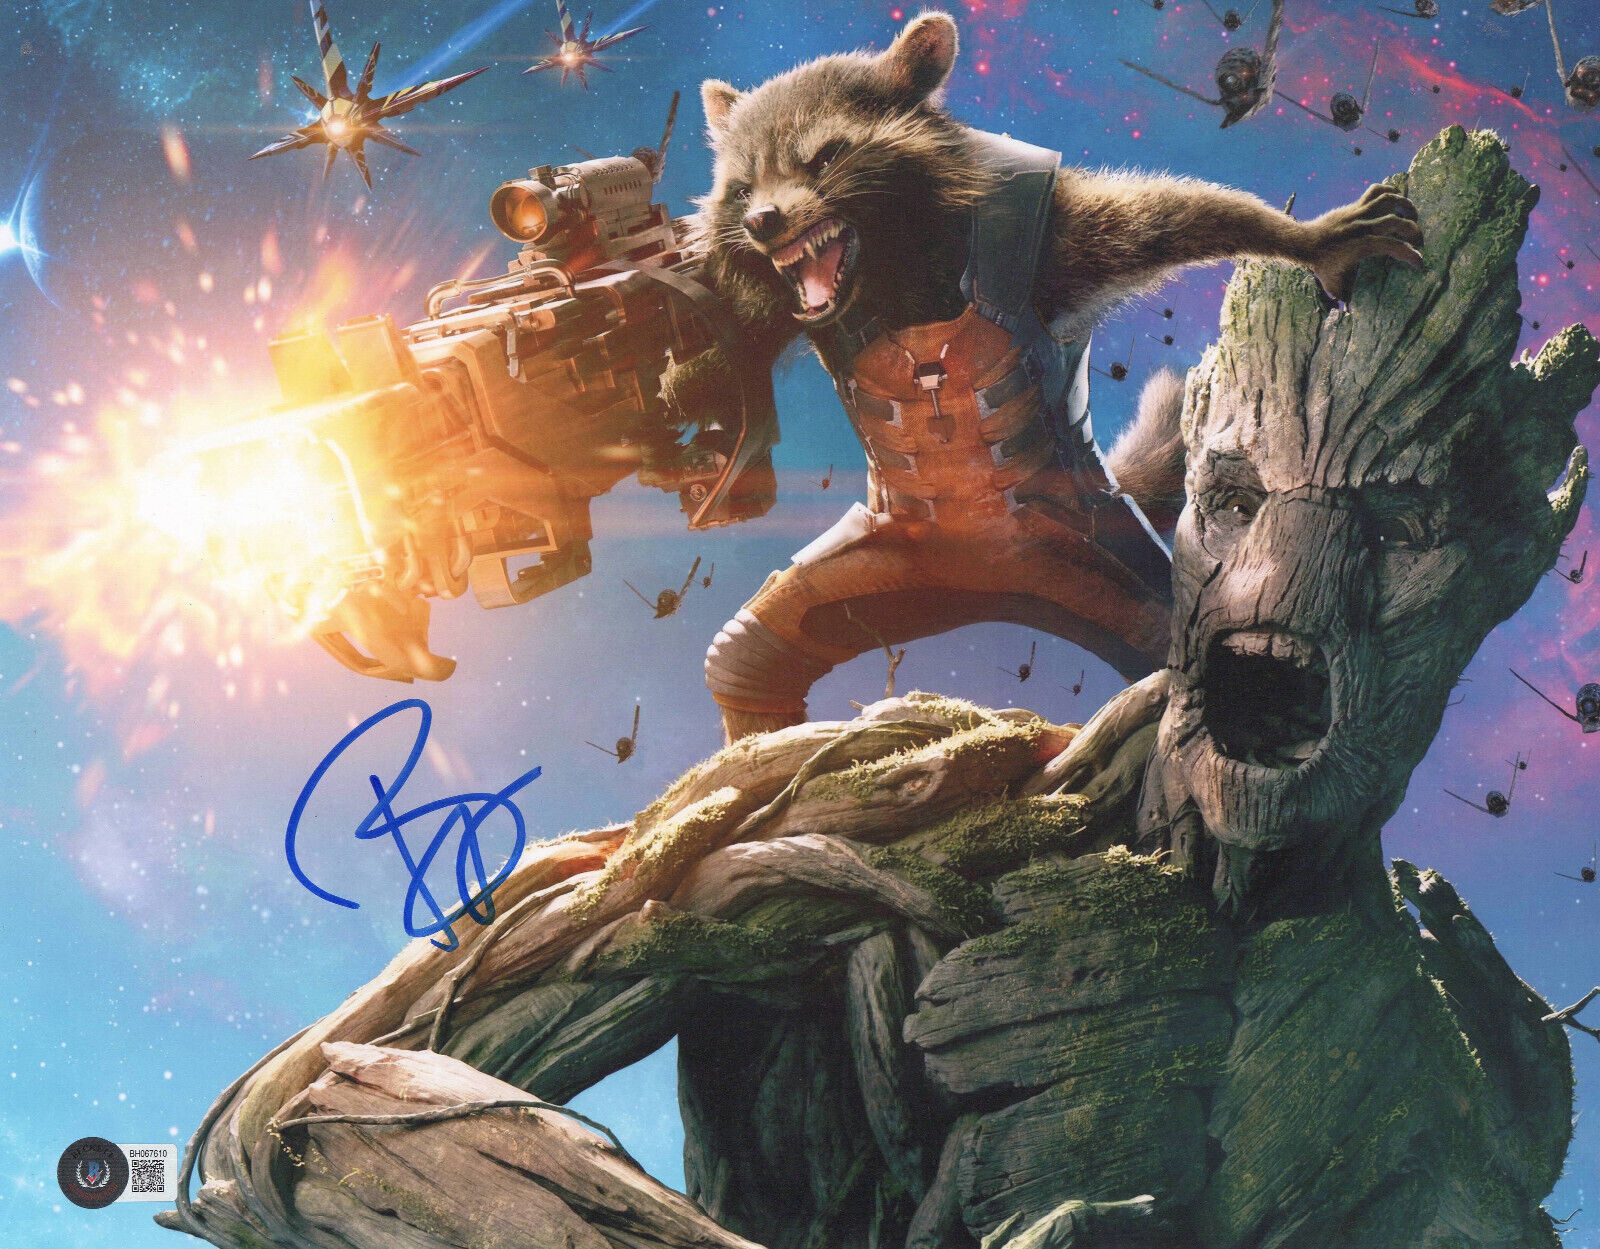 BRADLEY COOPER SIGNED AUTOGRAPH GUARDIANS OF THE GALAXY 11X14 PHOTO BAS BECKETT